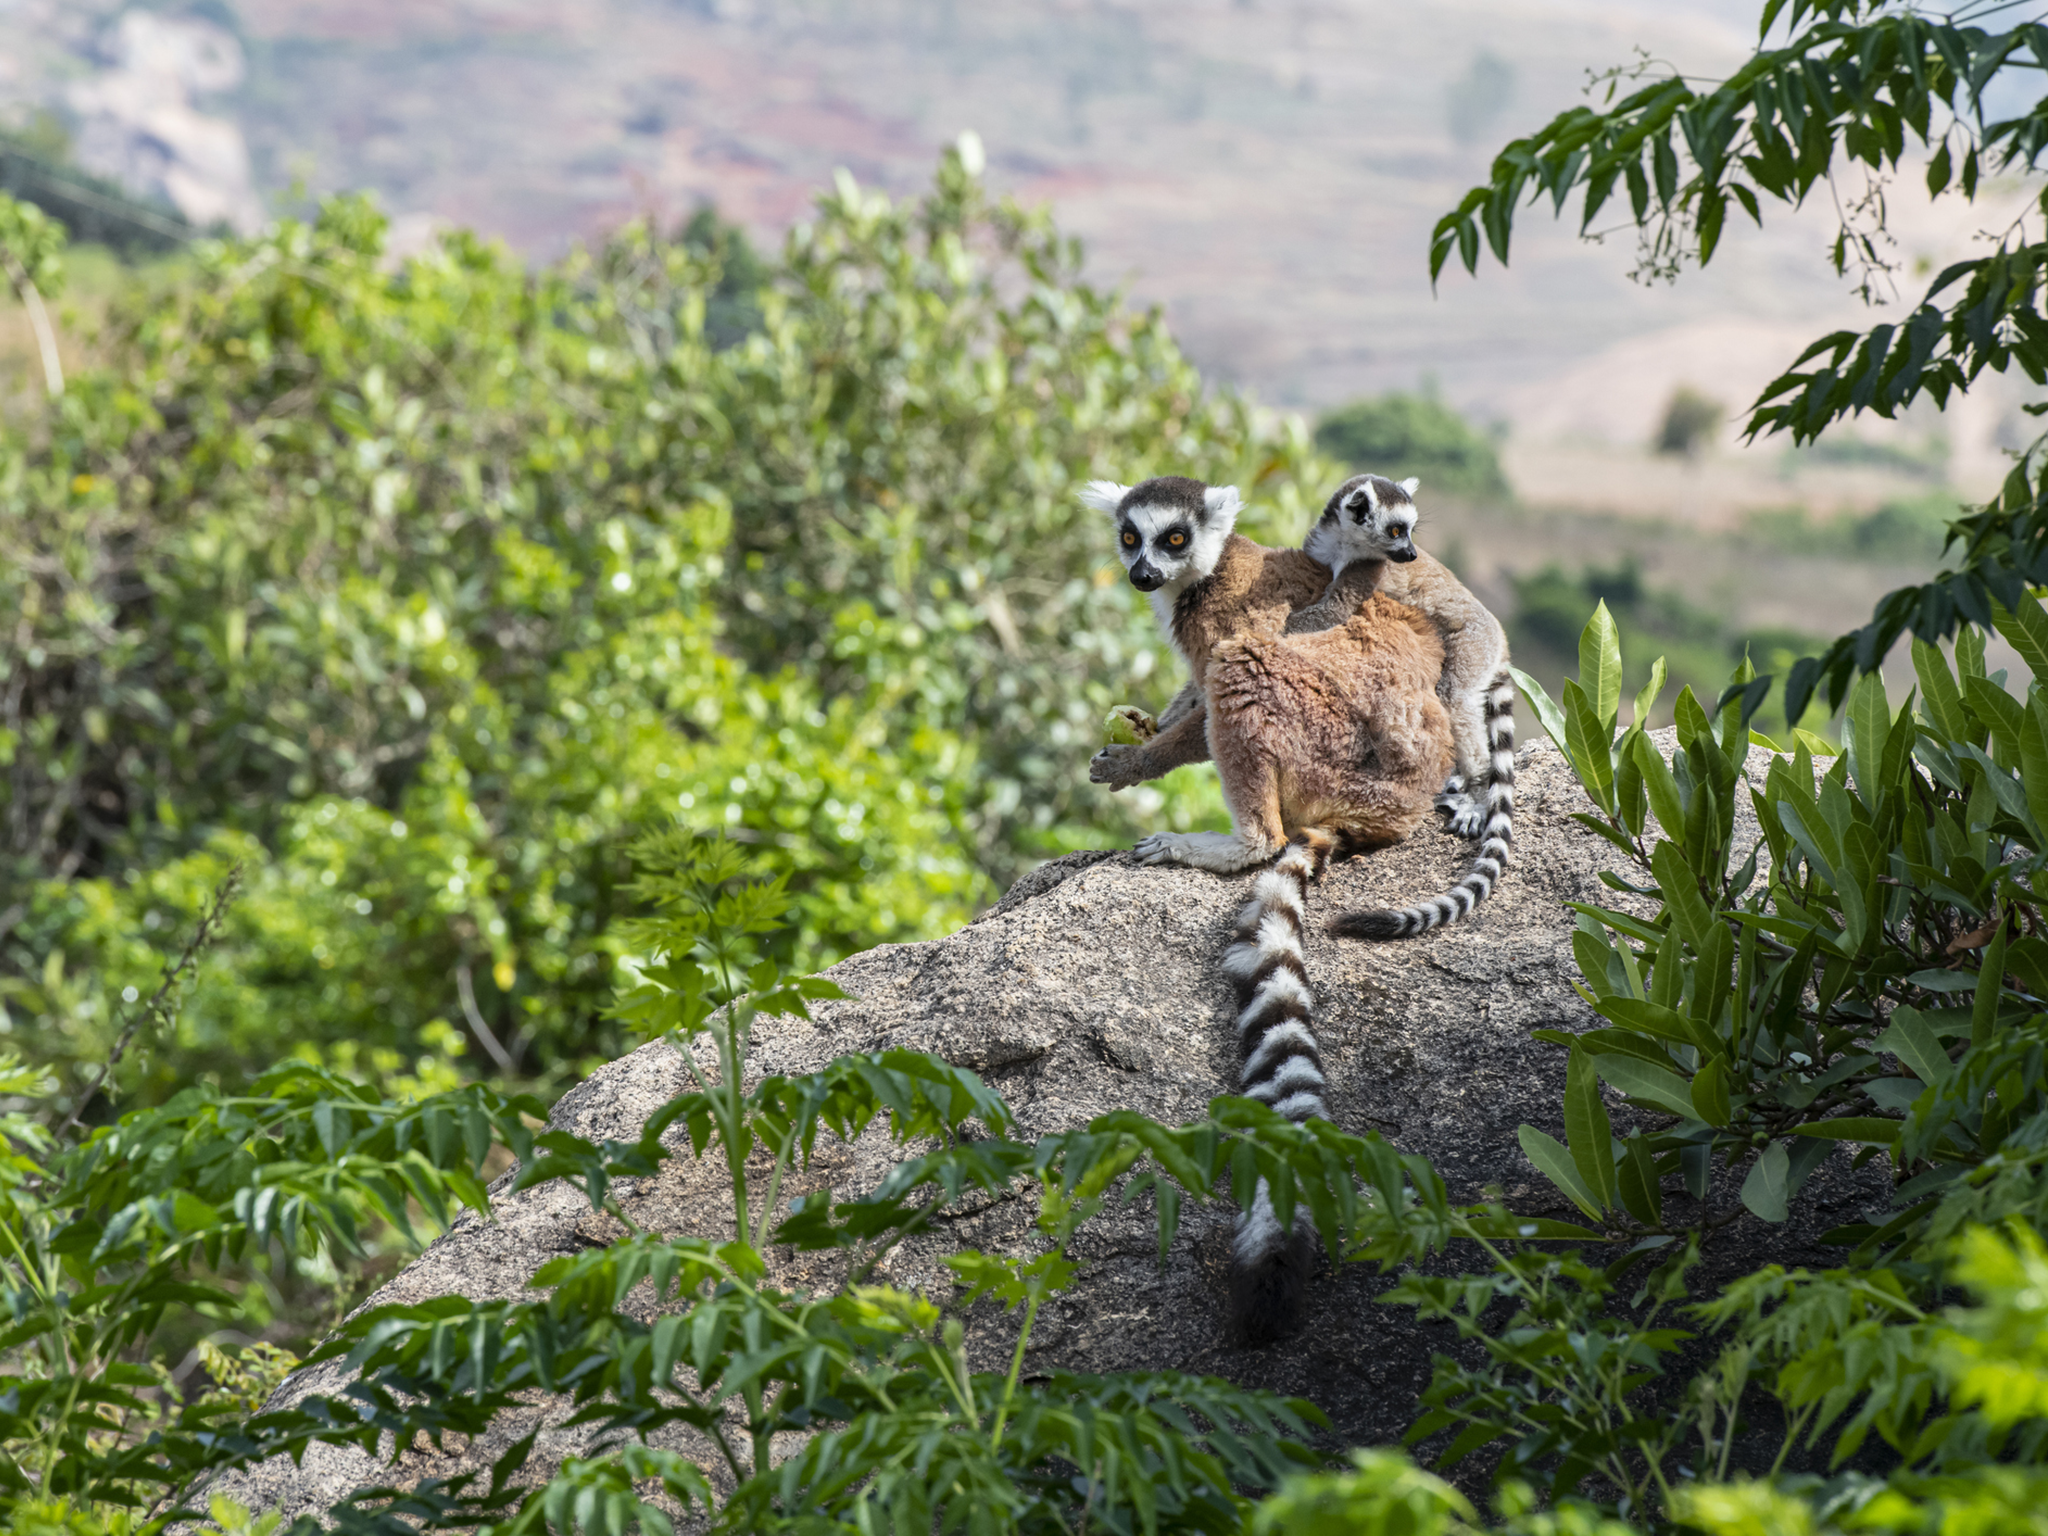 A holiday in Madagascar means getting to see some rather impressive creatures